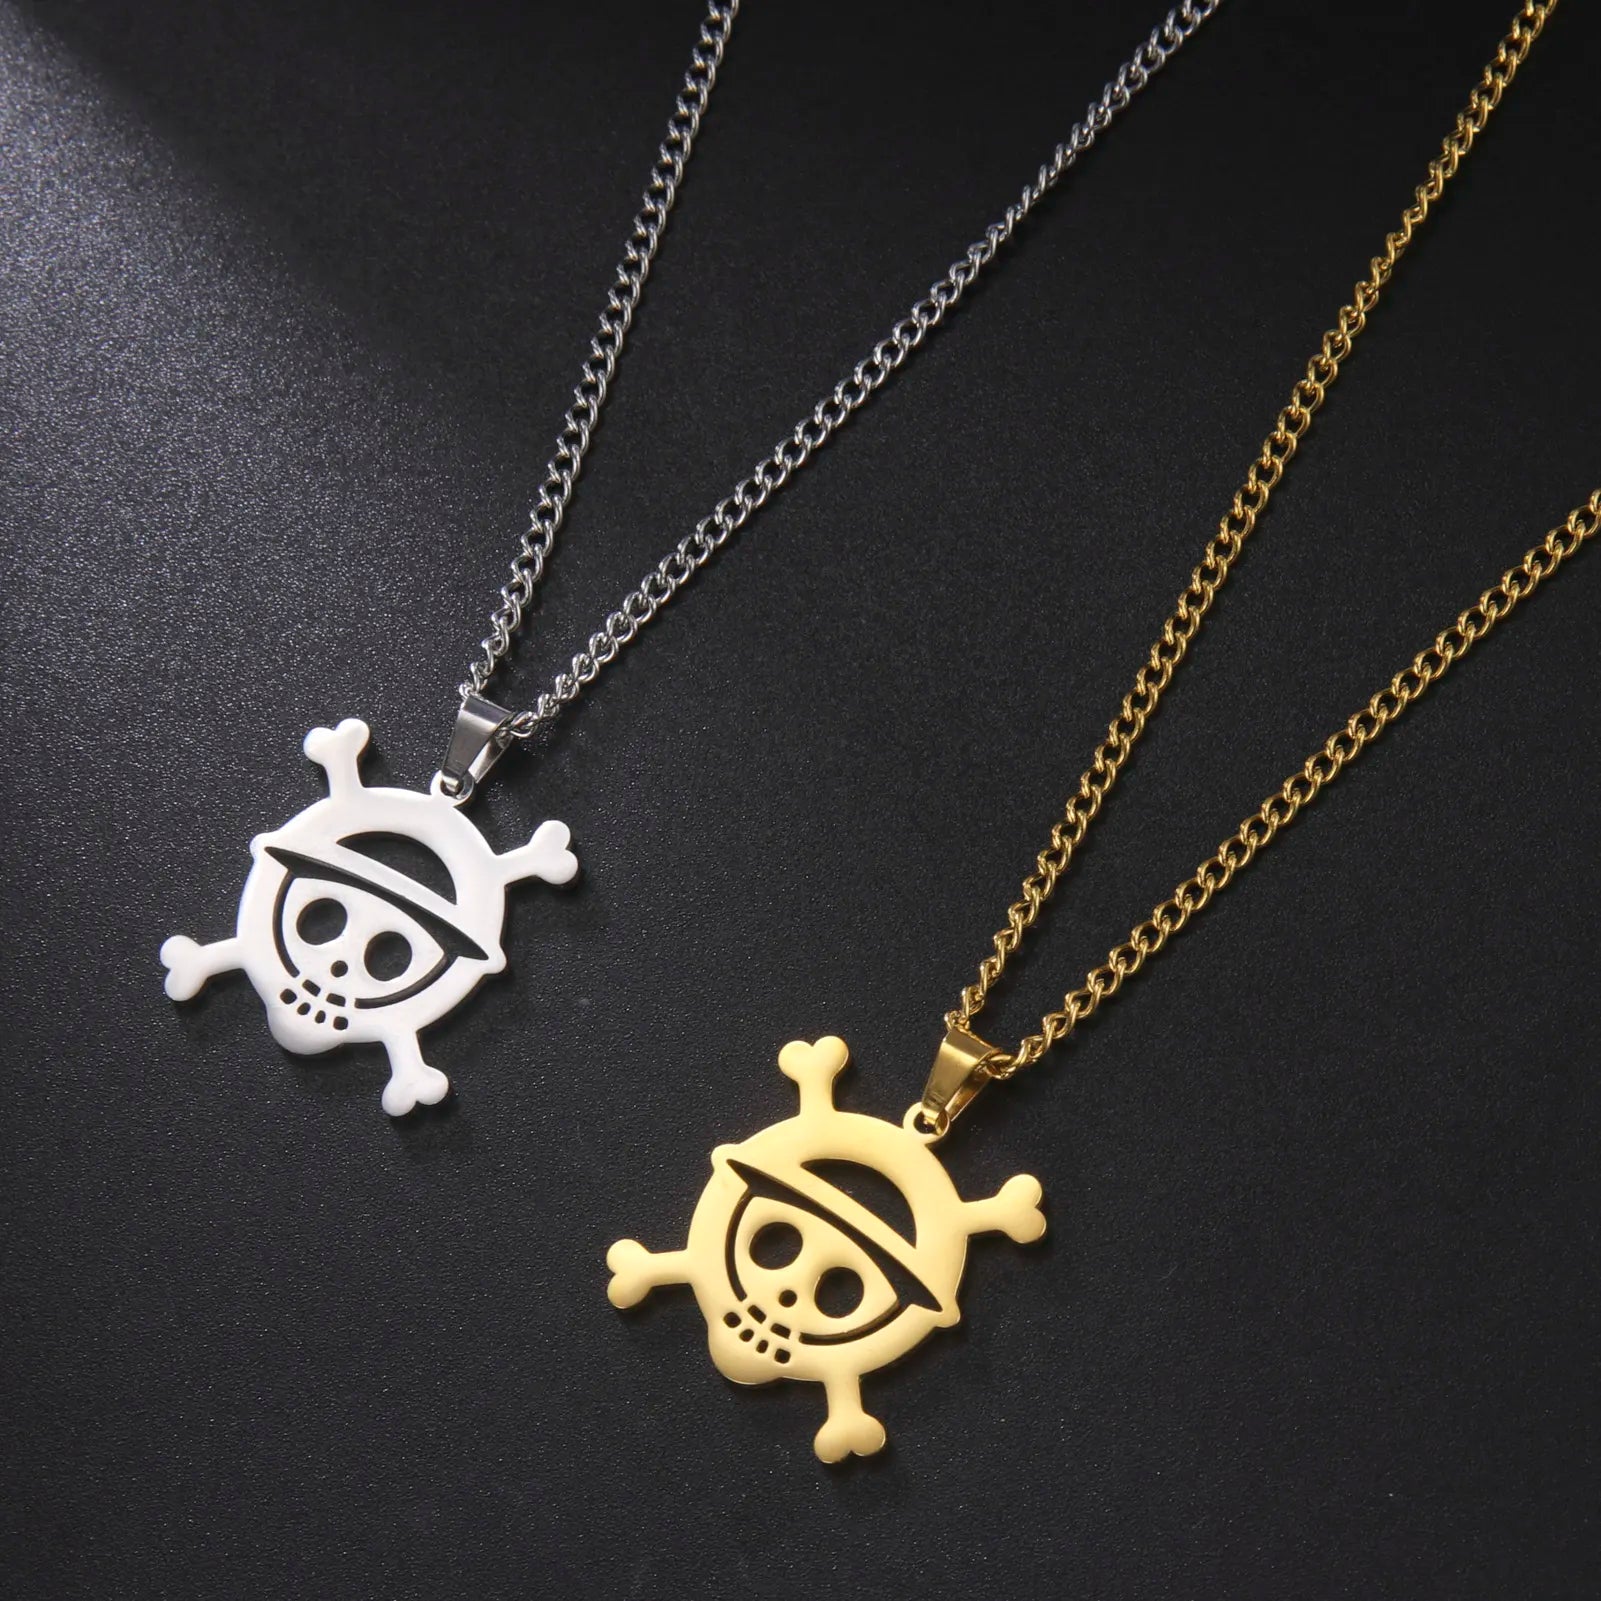 One Piece Stainless Steel Pendant